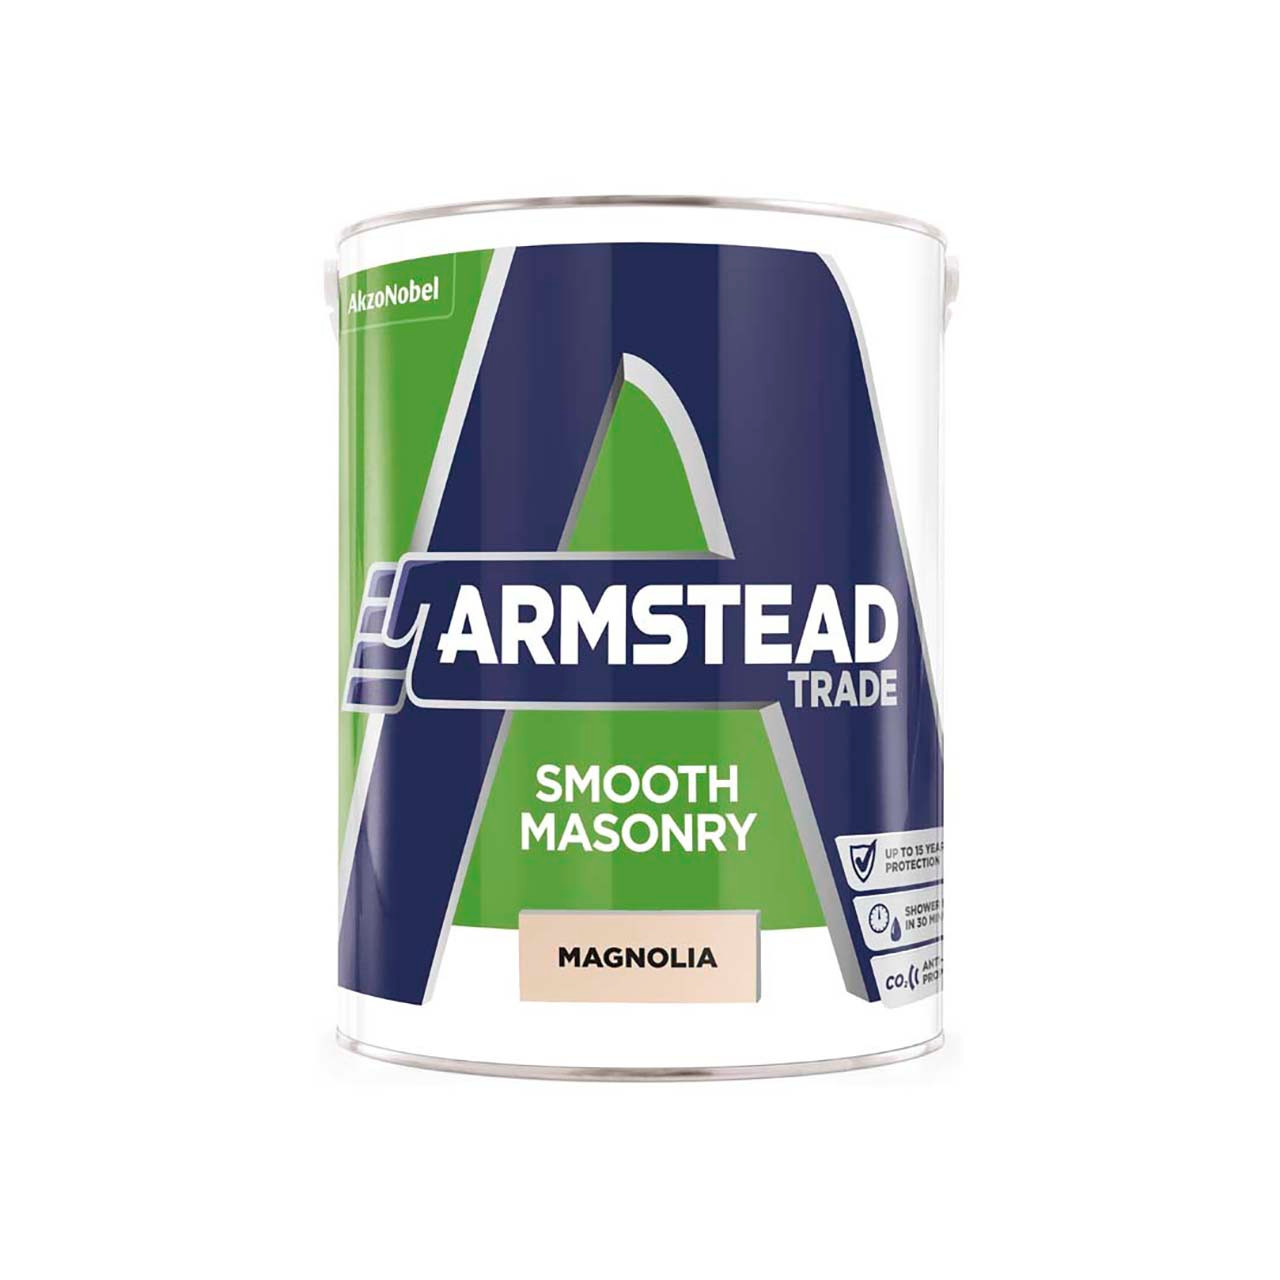 Photograph of Armstead Trade Masonry Paint Smooth Magnolia 5L